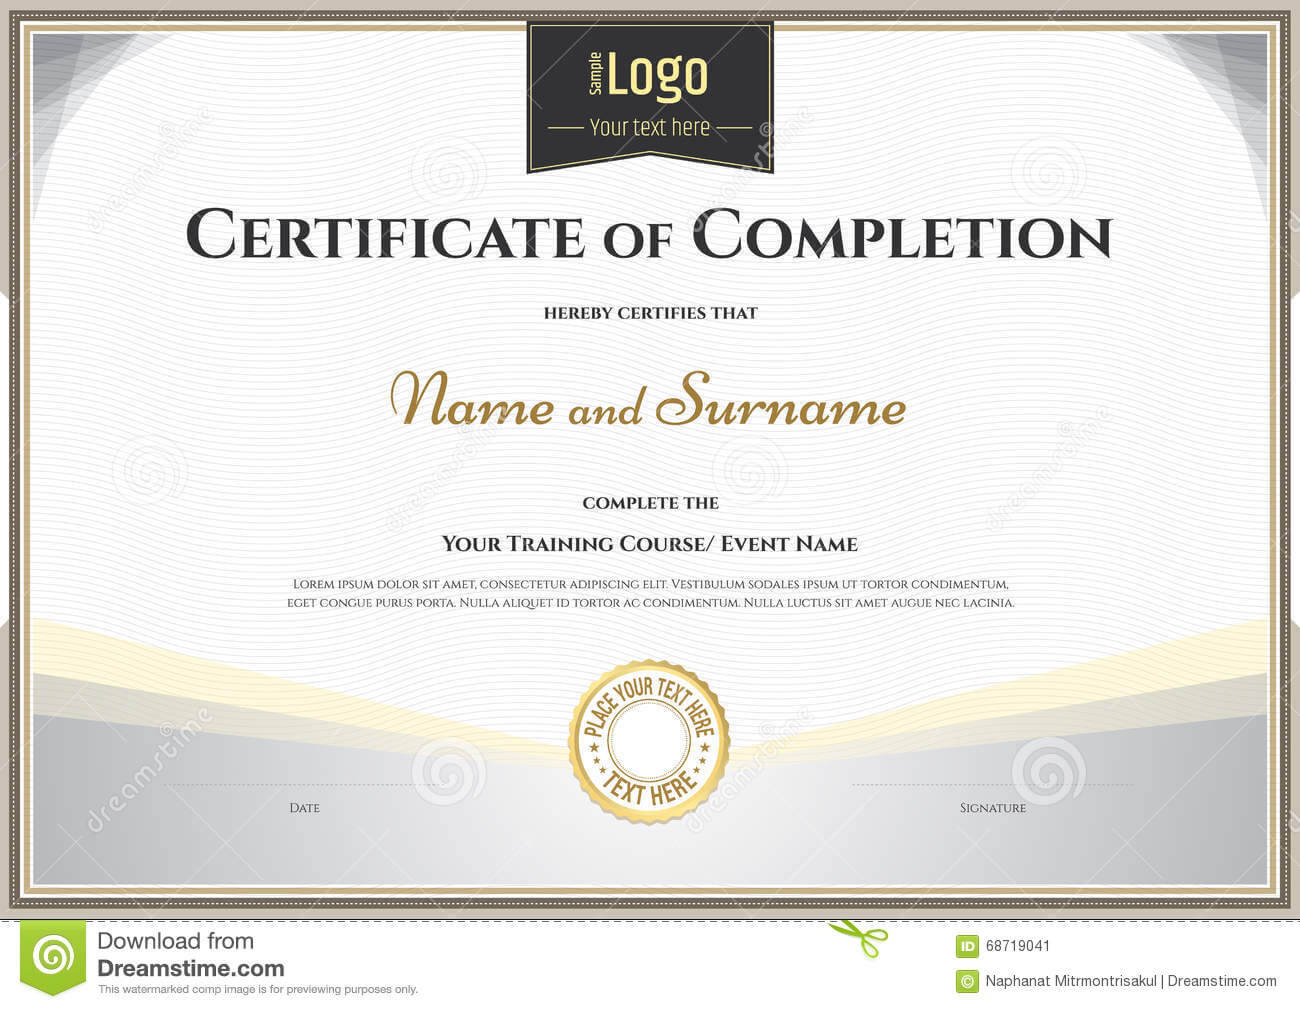 Certificate Of Completion Template In Vector For Achievement Throughout Certification Of Completion Template